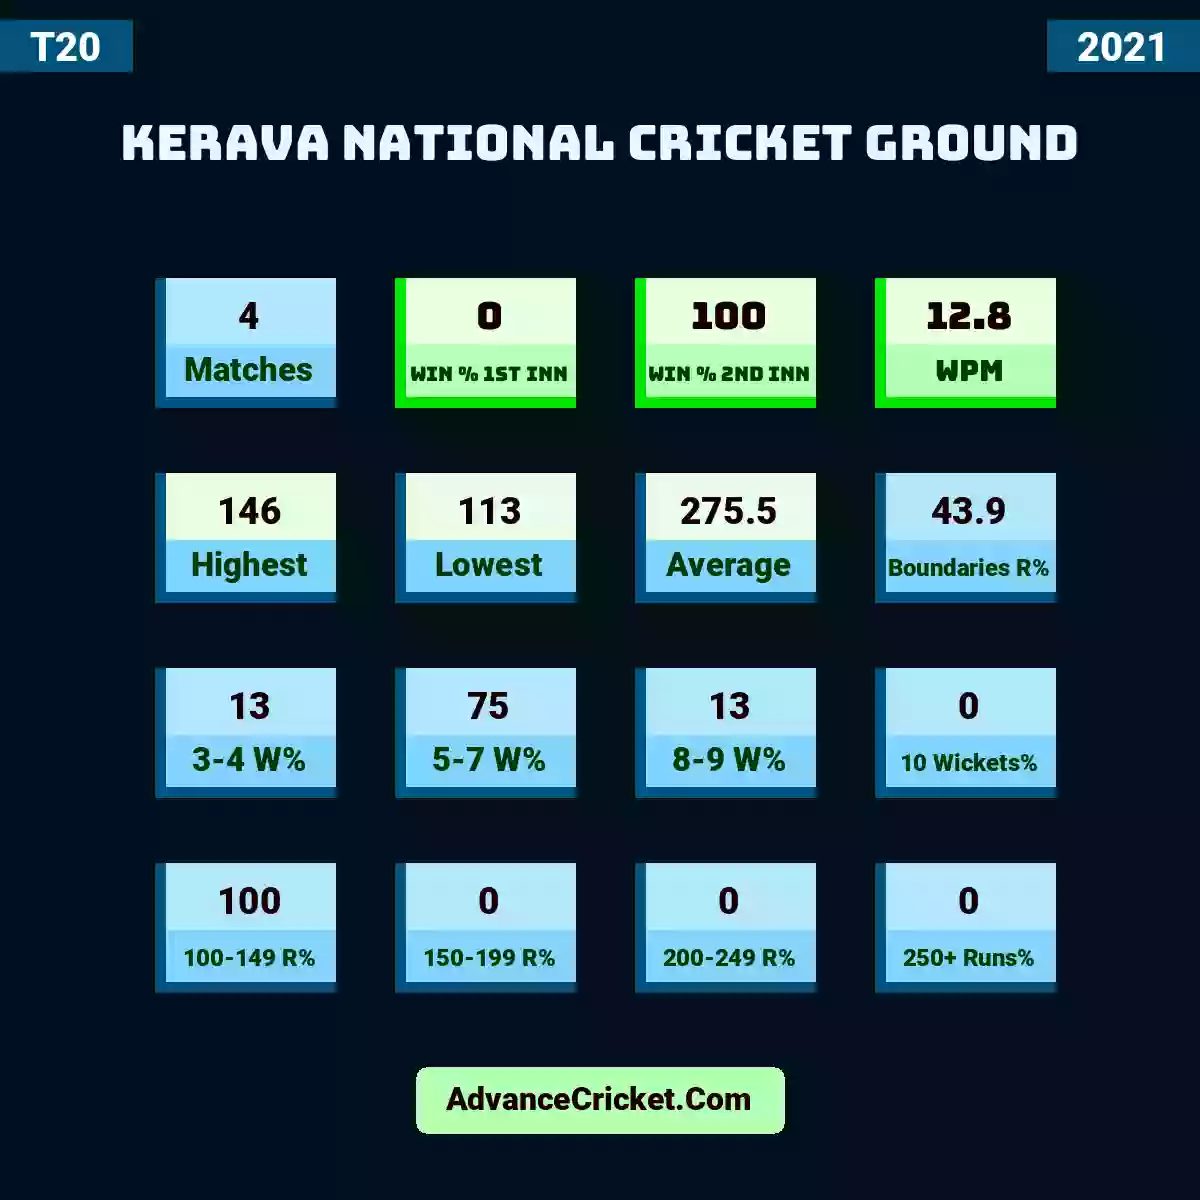 Image showing Kerava National Cricket Ground with Matches: 4, Win % 1st Inn: 0, Win % 2nd Inn: 100, WPM: 12.8, Highest: 146, Lowest: 113, Average: 275.5, Boundaries R%: 43.9, 3-4 W%: 13, 5-7 W%: 75, 8-9 W%: 13, 10 Wickets%: 0, 100-149 R%: 100, 150-199 R%: 0, 200-249 R%: 0, 250+ Runs%: 0.